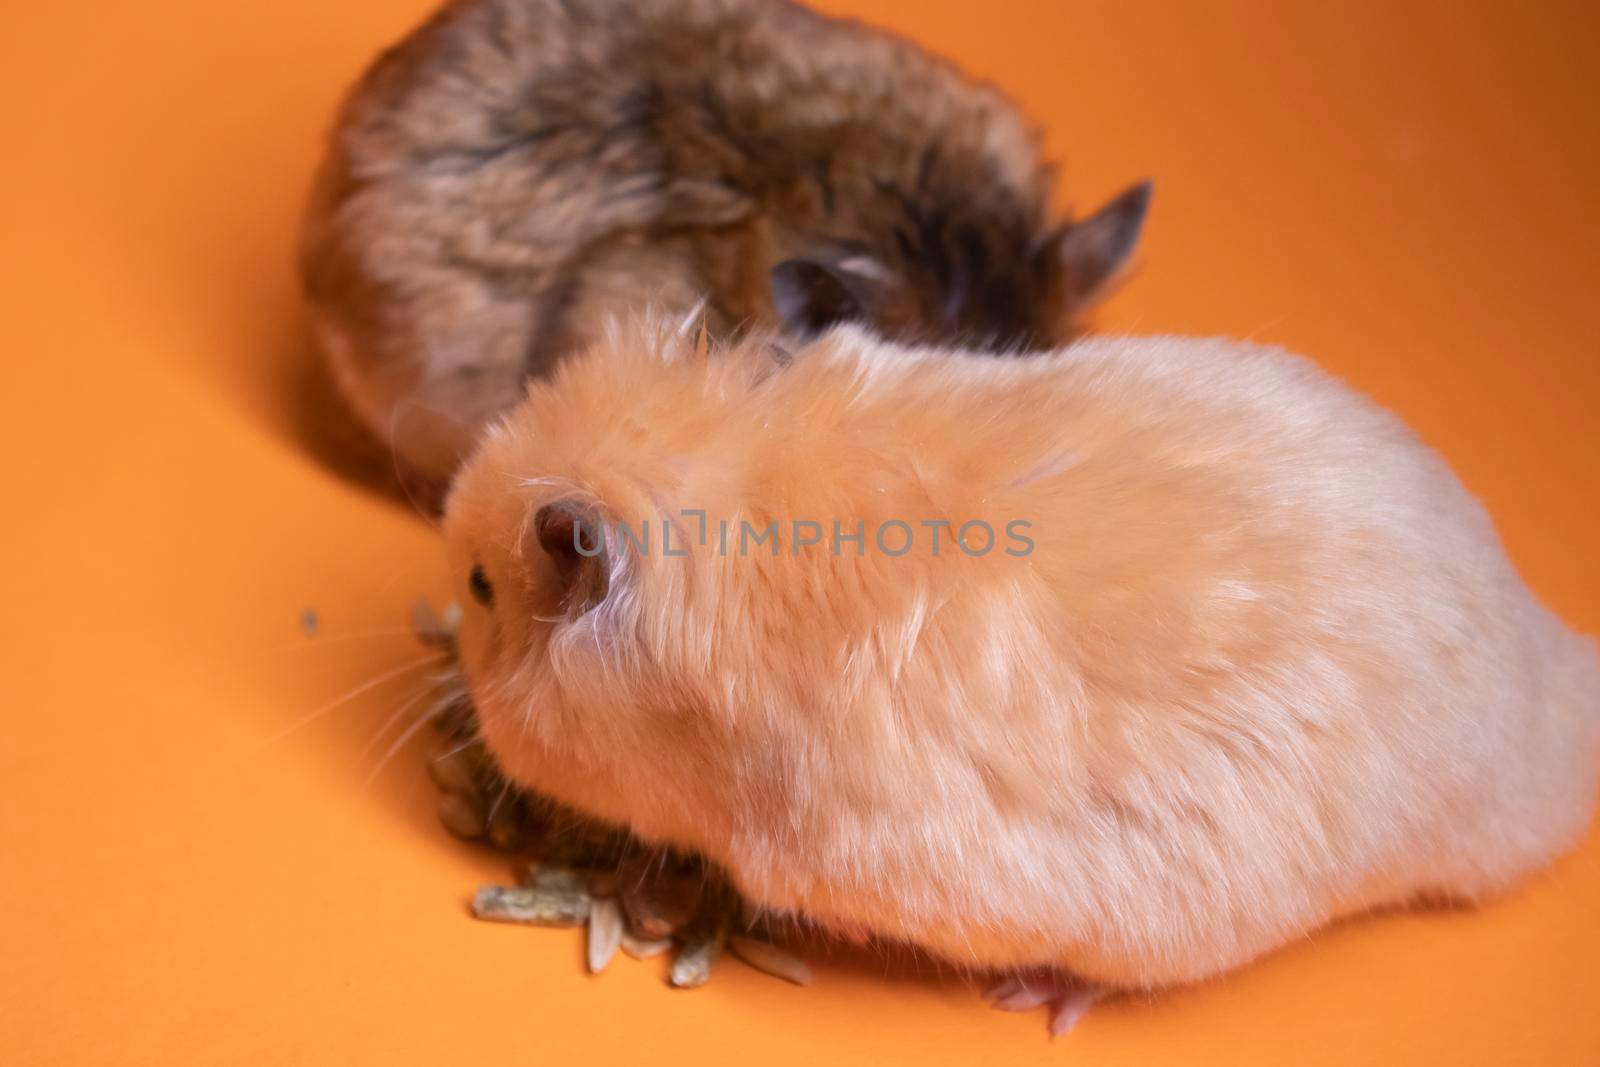 two, brown and beige, hamsters mouses eating food for rodents isolated on orange background. pets, pest by oliavesna